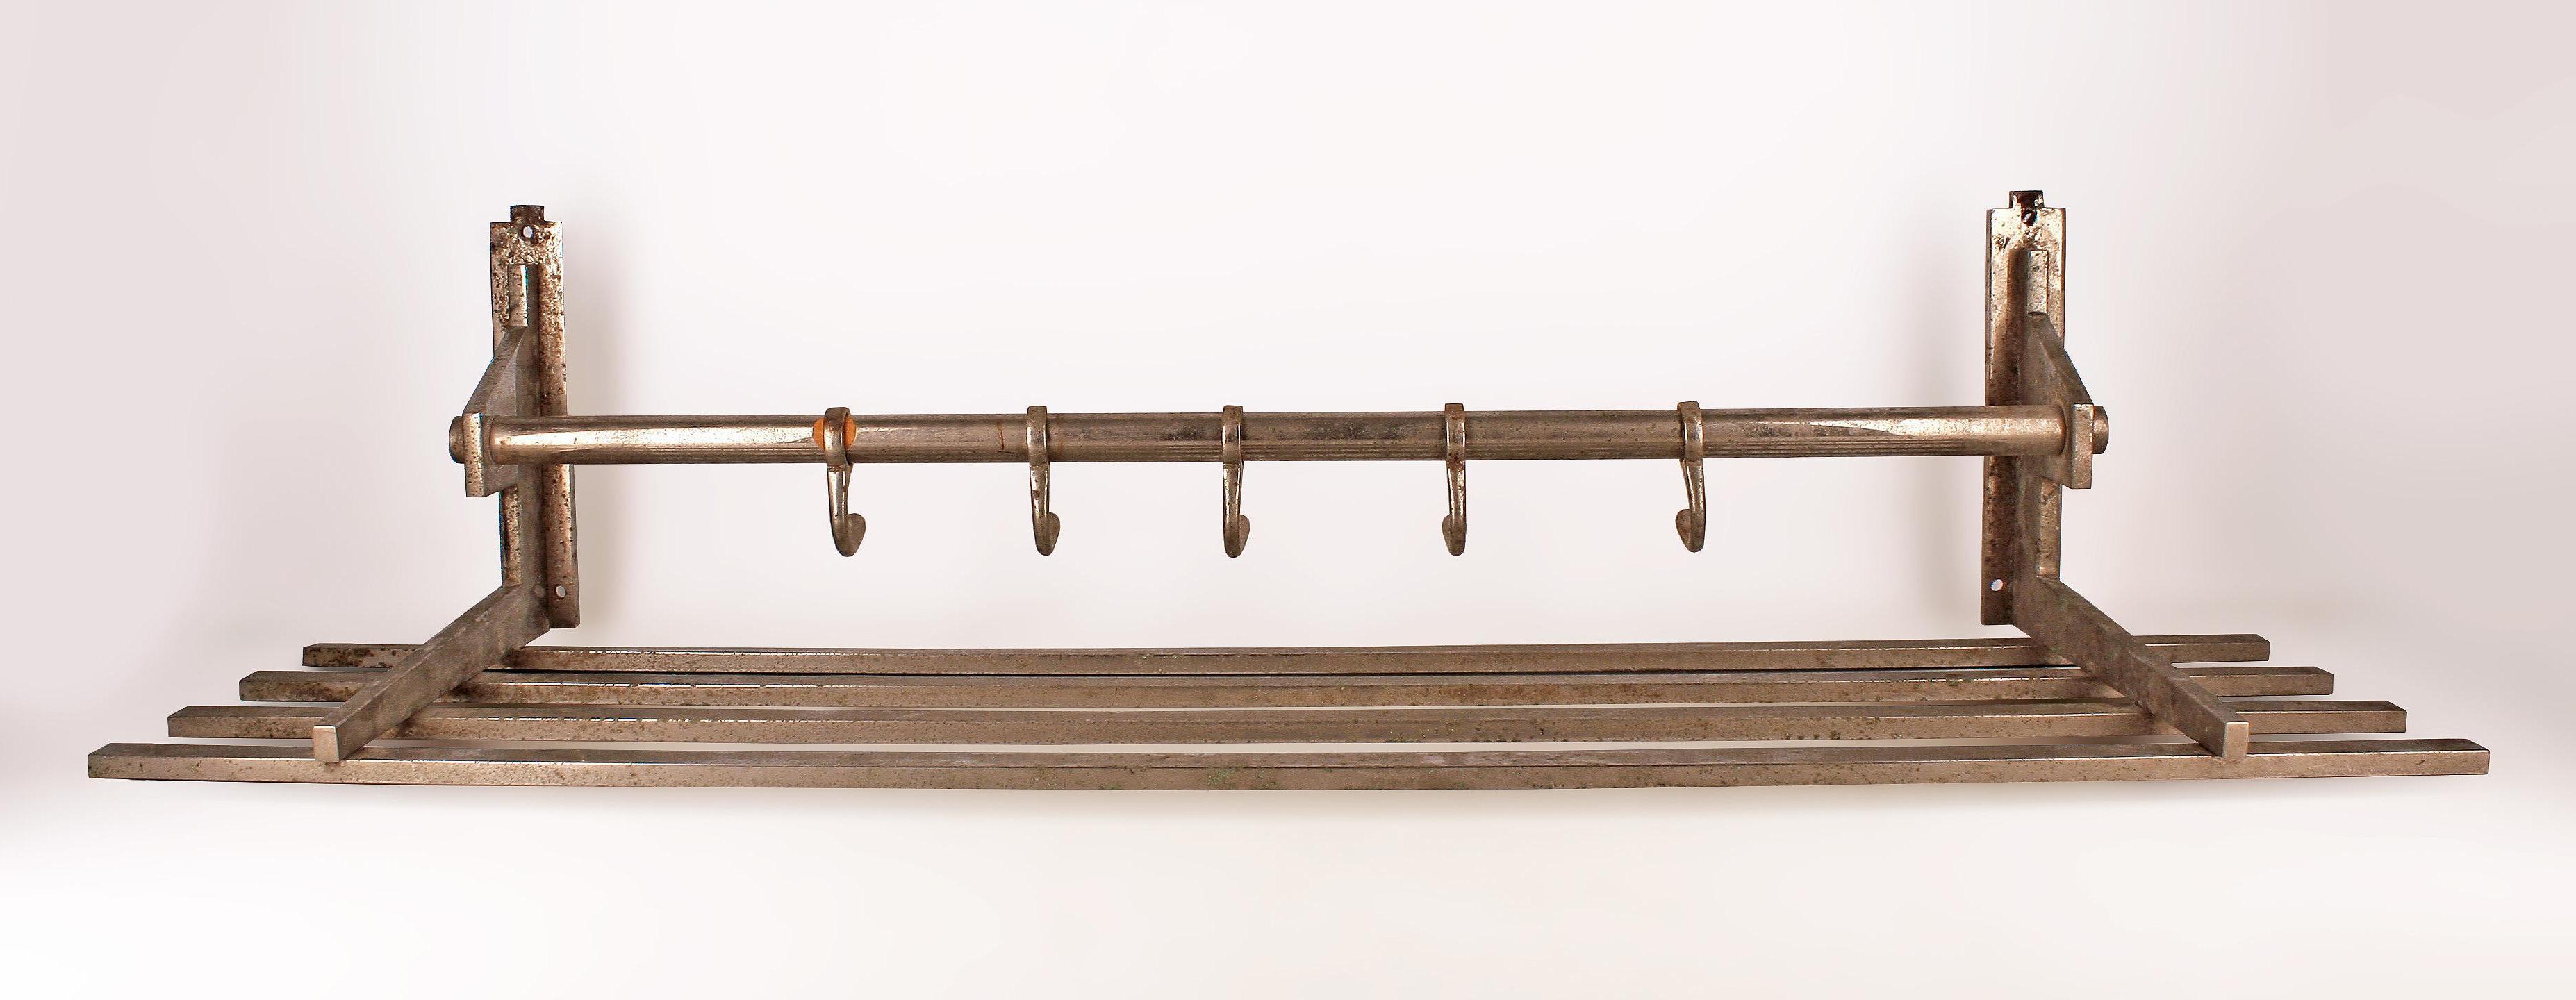 Early 20th century Art Déco french metal brass wall coat hanger/rack designed by La Maison Desny

By:  La Maison Desny
Material: brass, copper, metal, zinc
Technique: cast, forged, metalwork, molded, polished
Dimensions: 10 in x 36 in x 9 in
Date: